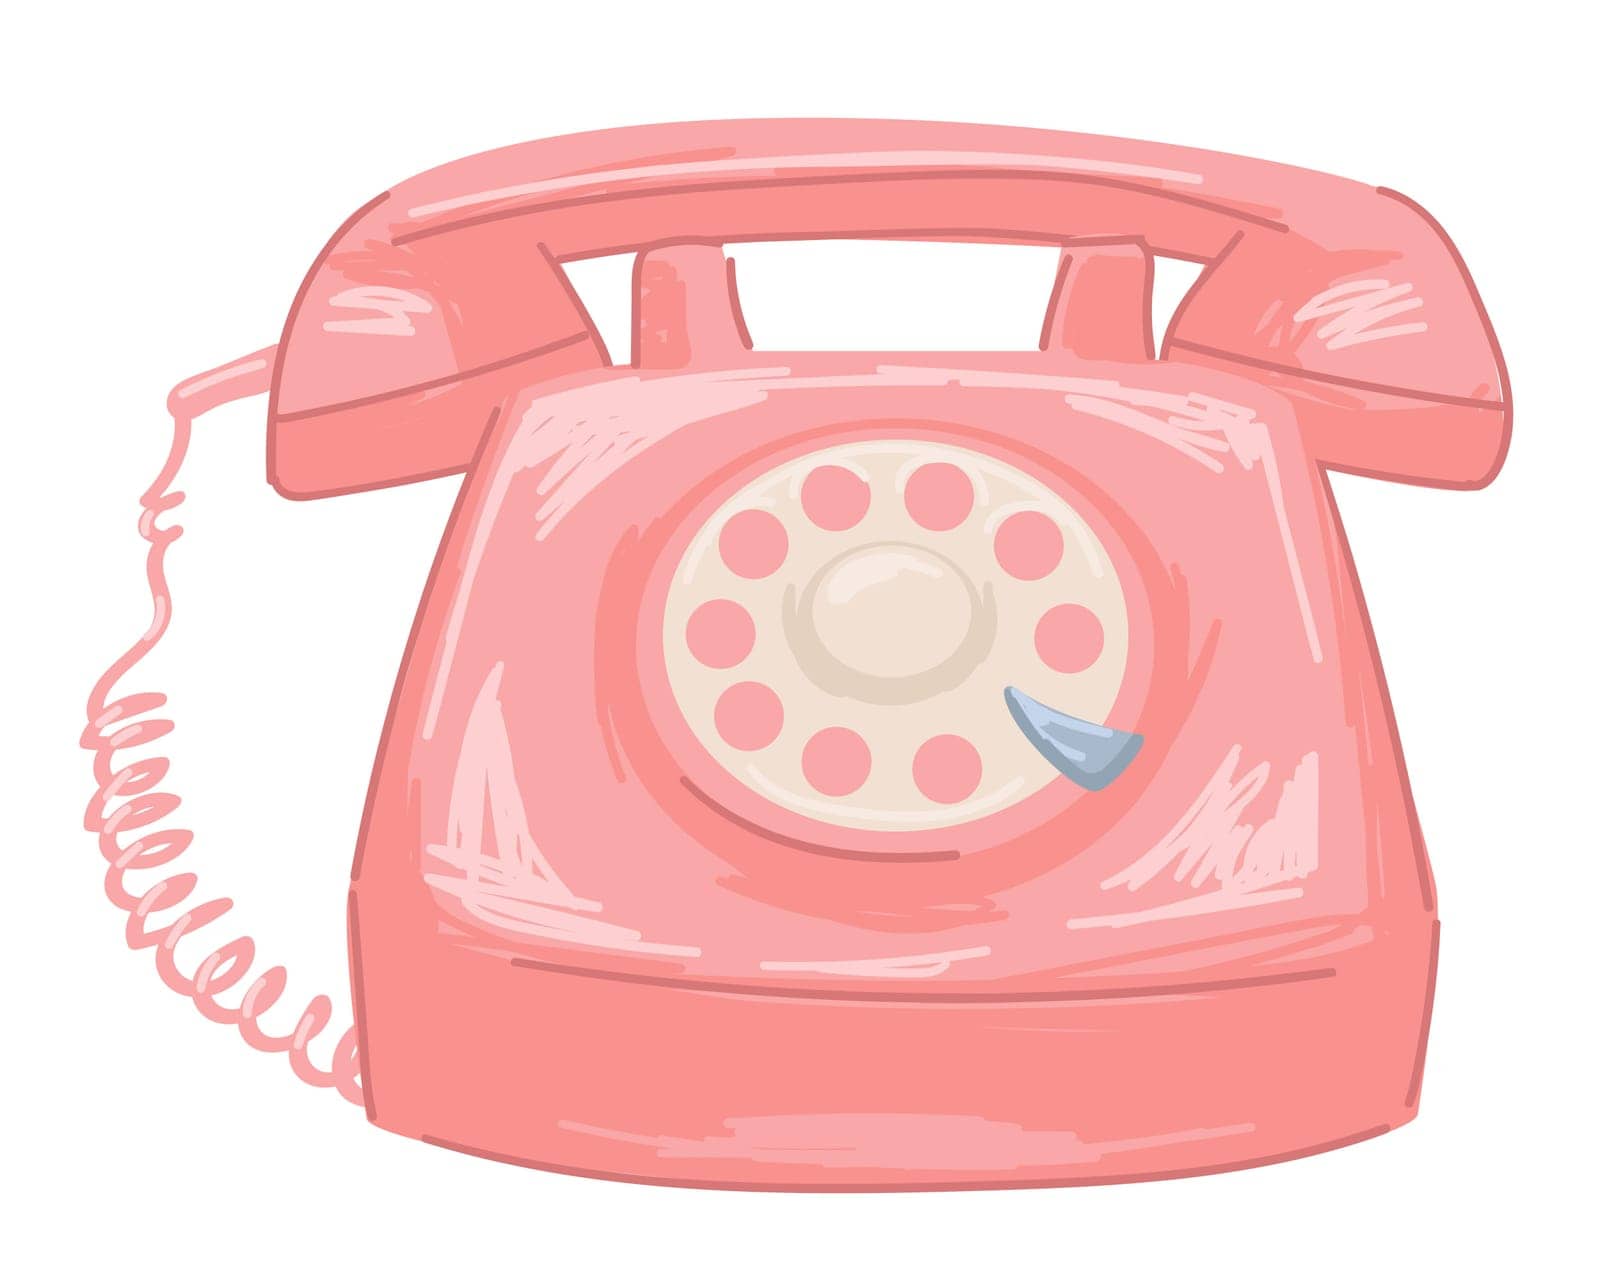 Vintage old school telephone, isolated phone with cords and wires. Communication and conversation in distance, 1960s design, 60s years pink device for calling and talking. Vector in flat style